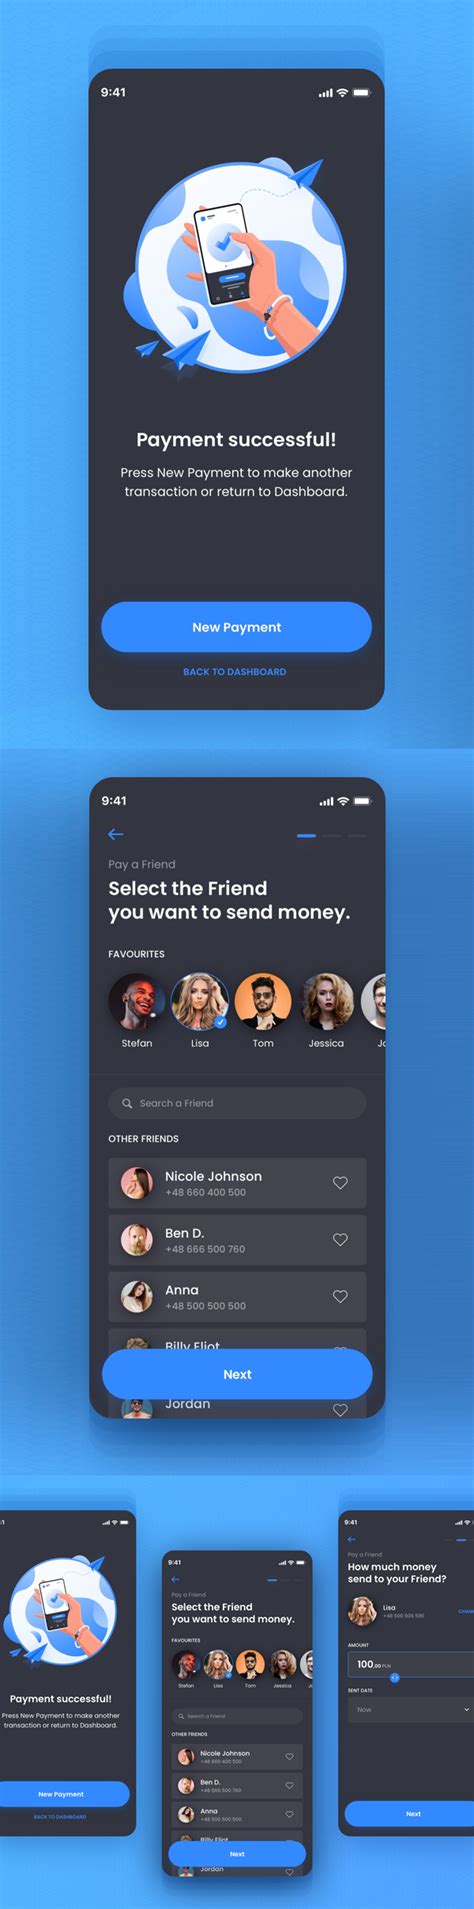 Invision allows sharing the design files with the team inside the app, which allows smooth and easy. 25 Modern Mobile App UI Design with Amazing UX ...